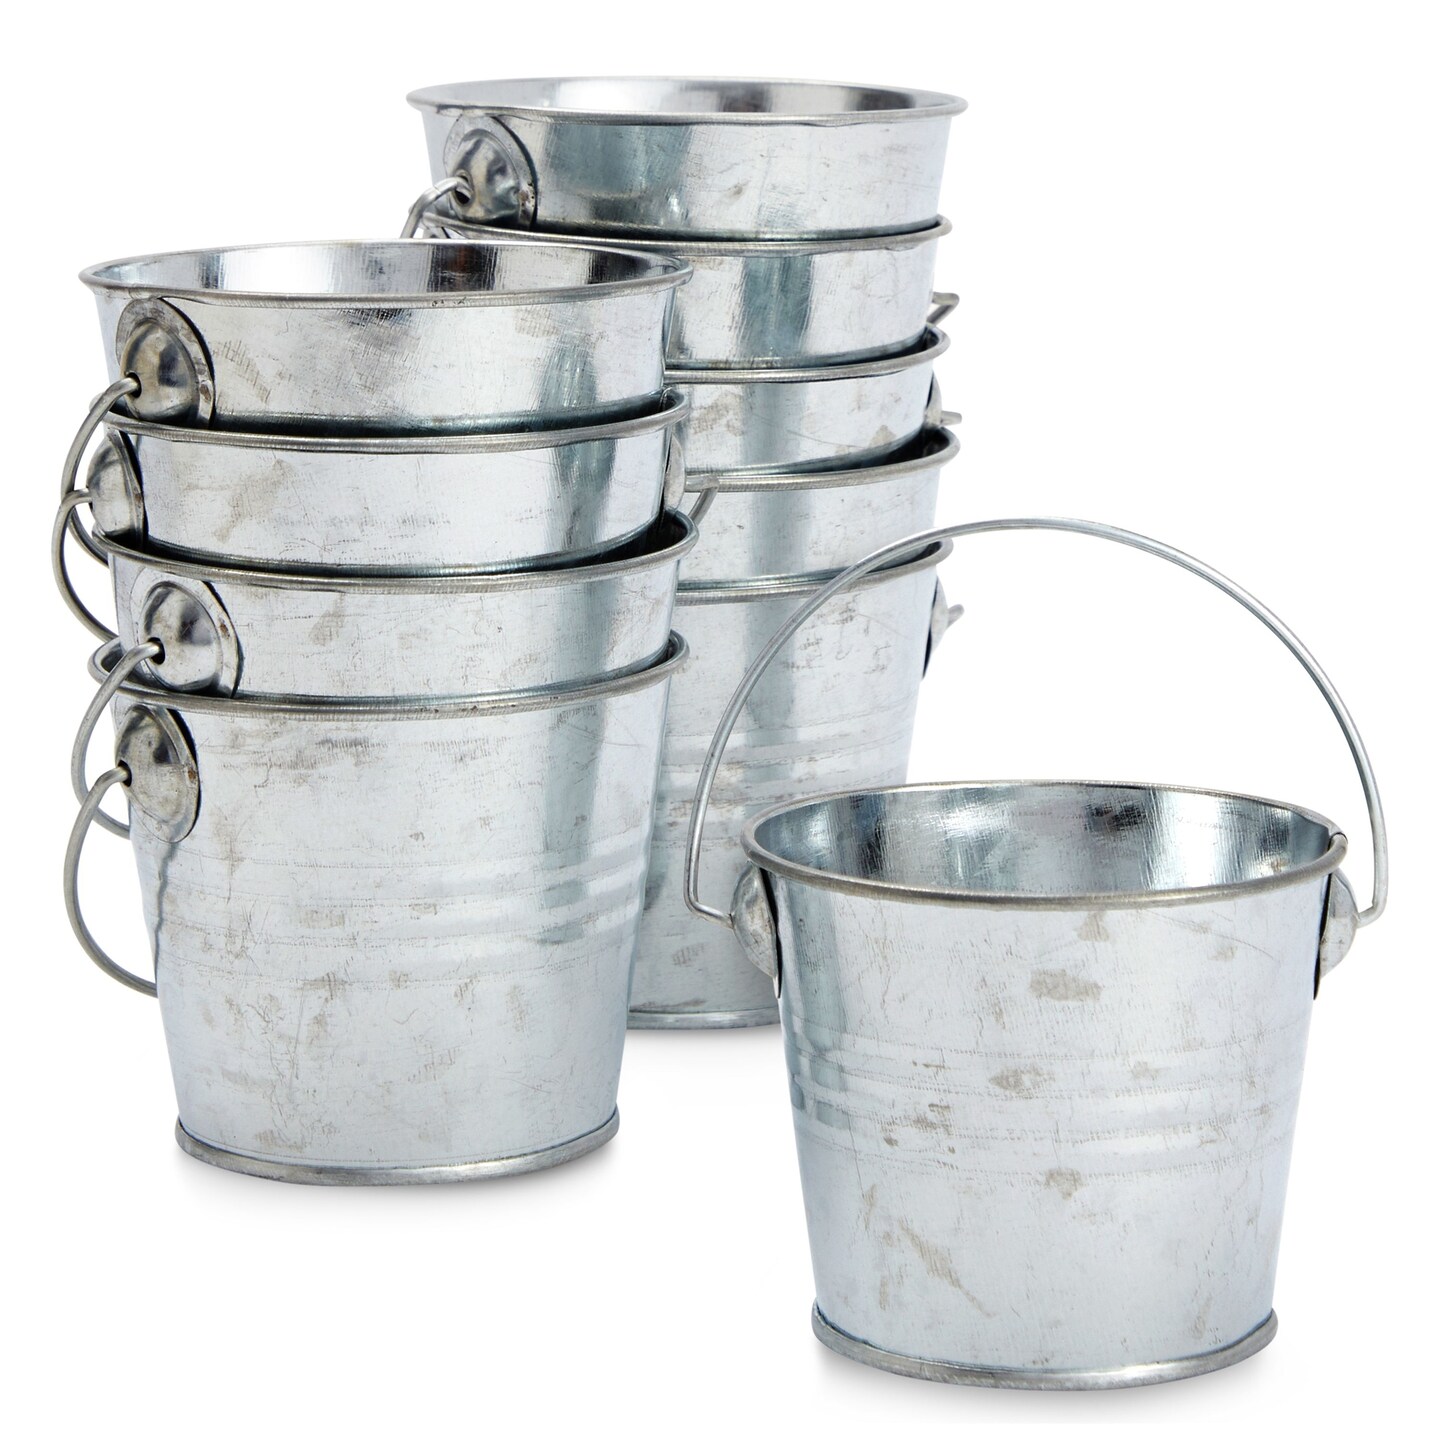 10 Pack Small Metal Buckets for Party Favors, Tiny Galvanized Silver Pails for Crafts, Succulents (3.3 x 2.5 x 3 In)